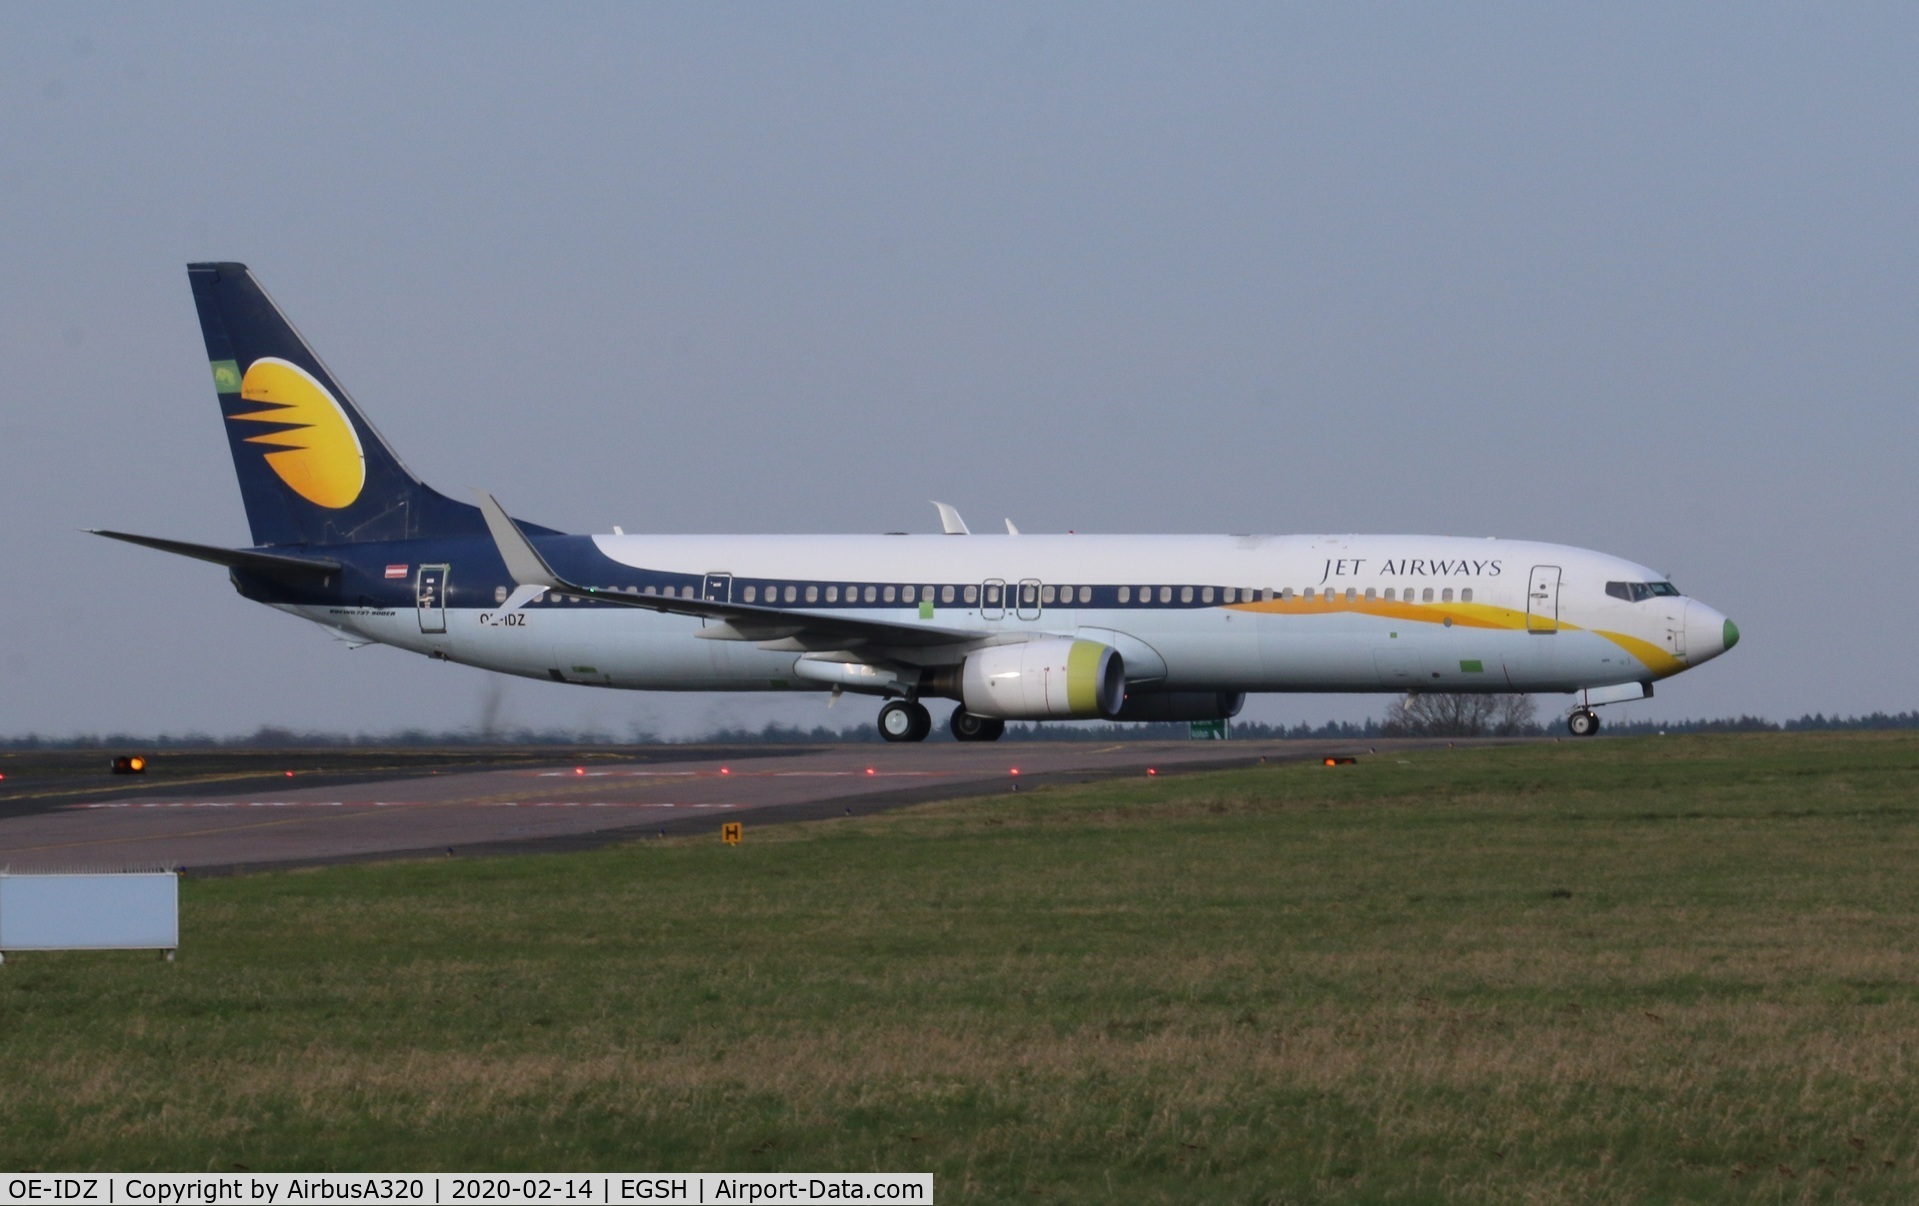 OE-IDZ, 2008 Boeing 737-96NER C/N 35227, Back tracking after arriving from Lasham